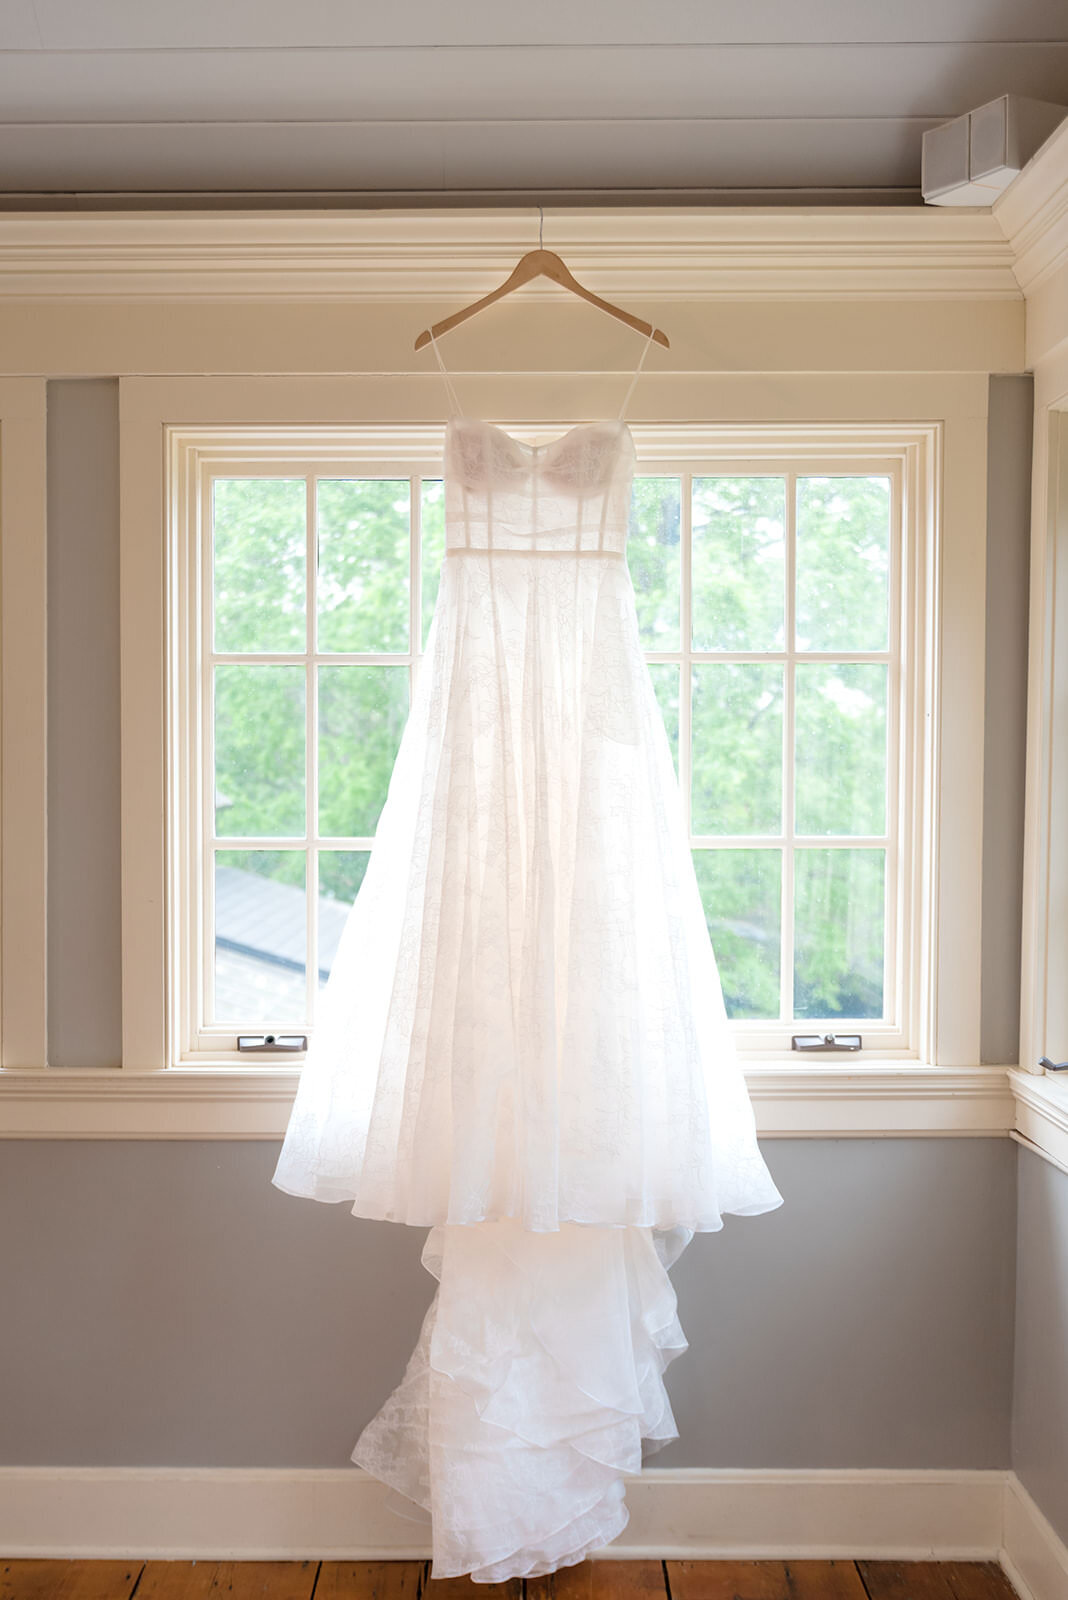 A white wedding dress hanging in front of a window in a room with cream walls.